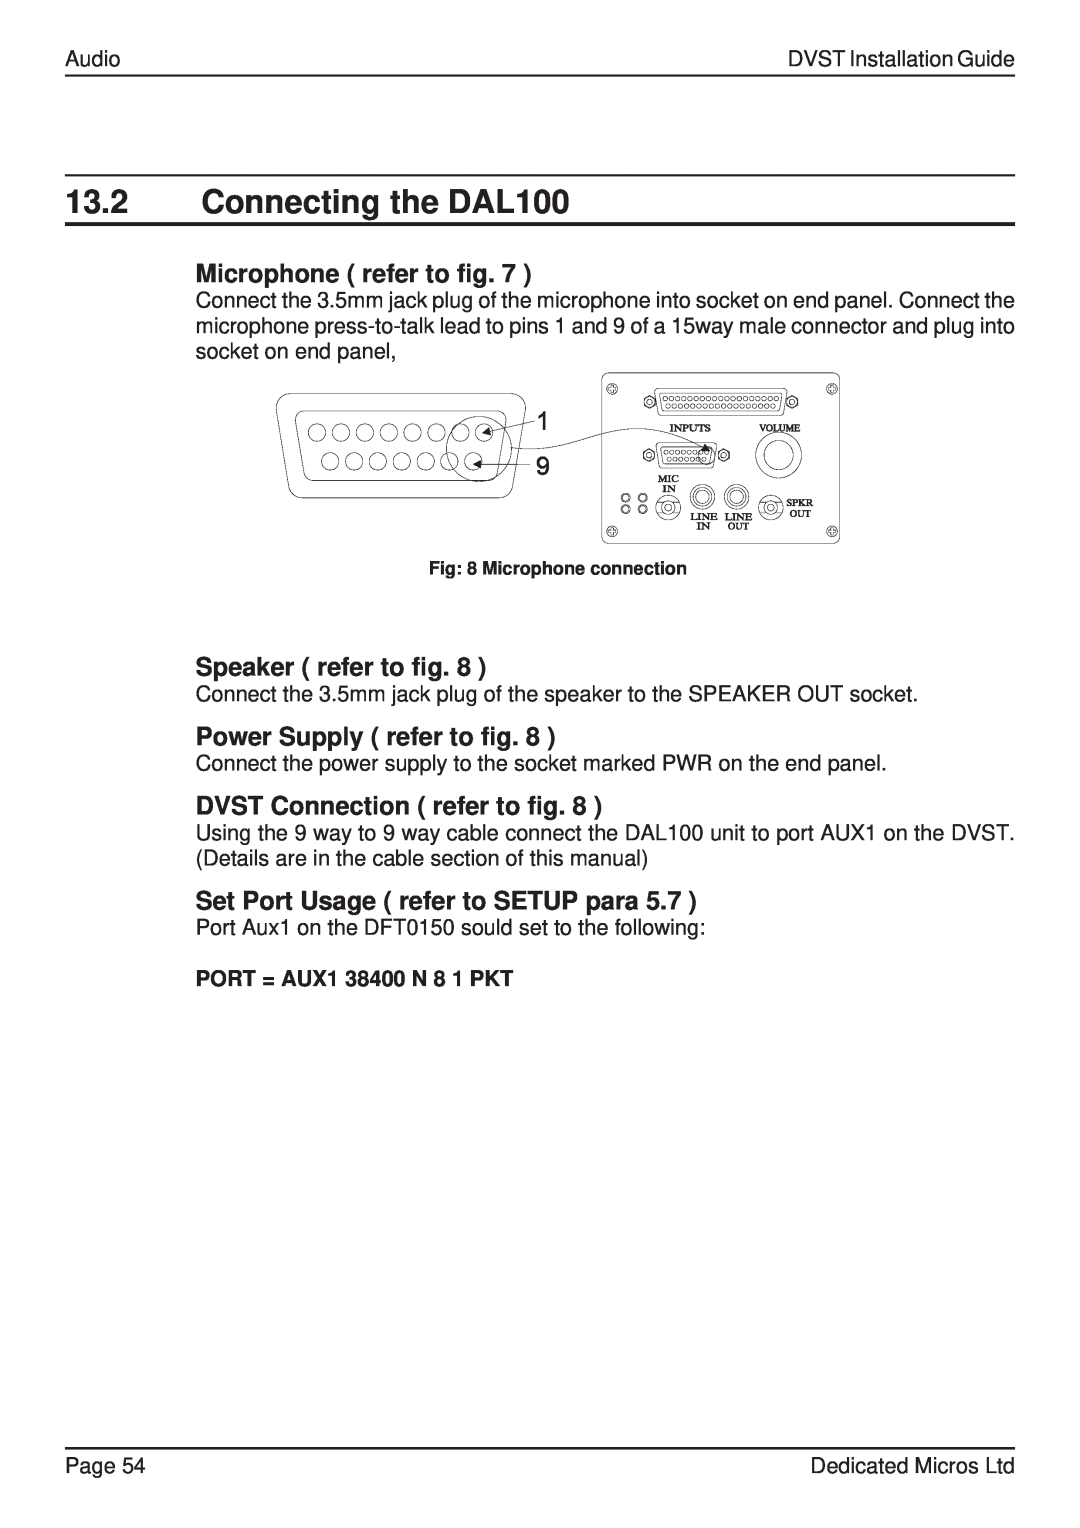 Guardian Technologies DVST, DFT 150/175 manual 13.2Connecting the DAL100, Microphone refer to fig, Speaker refer to fig 